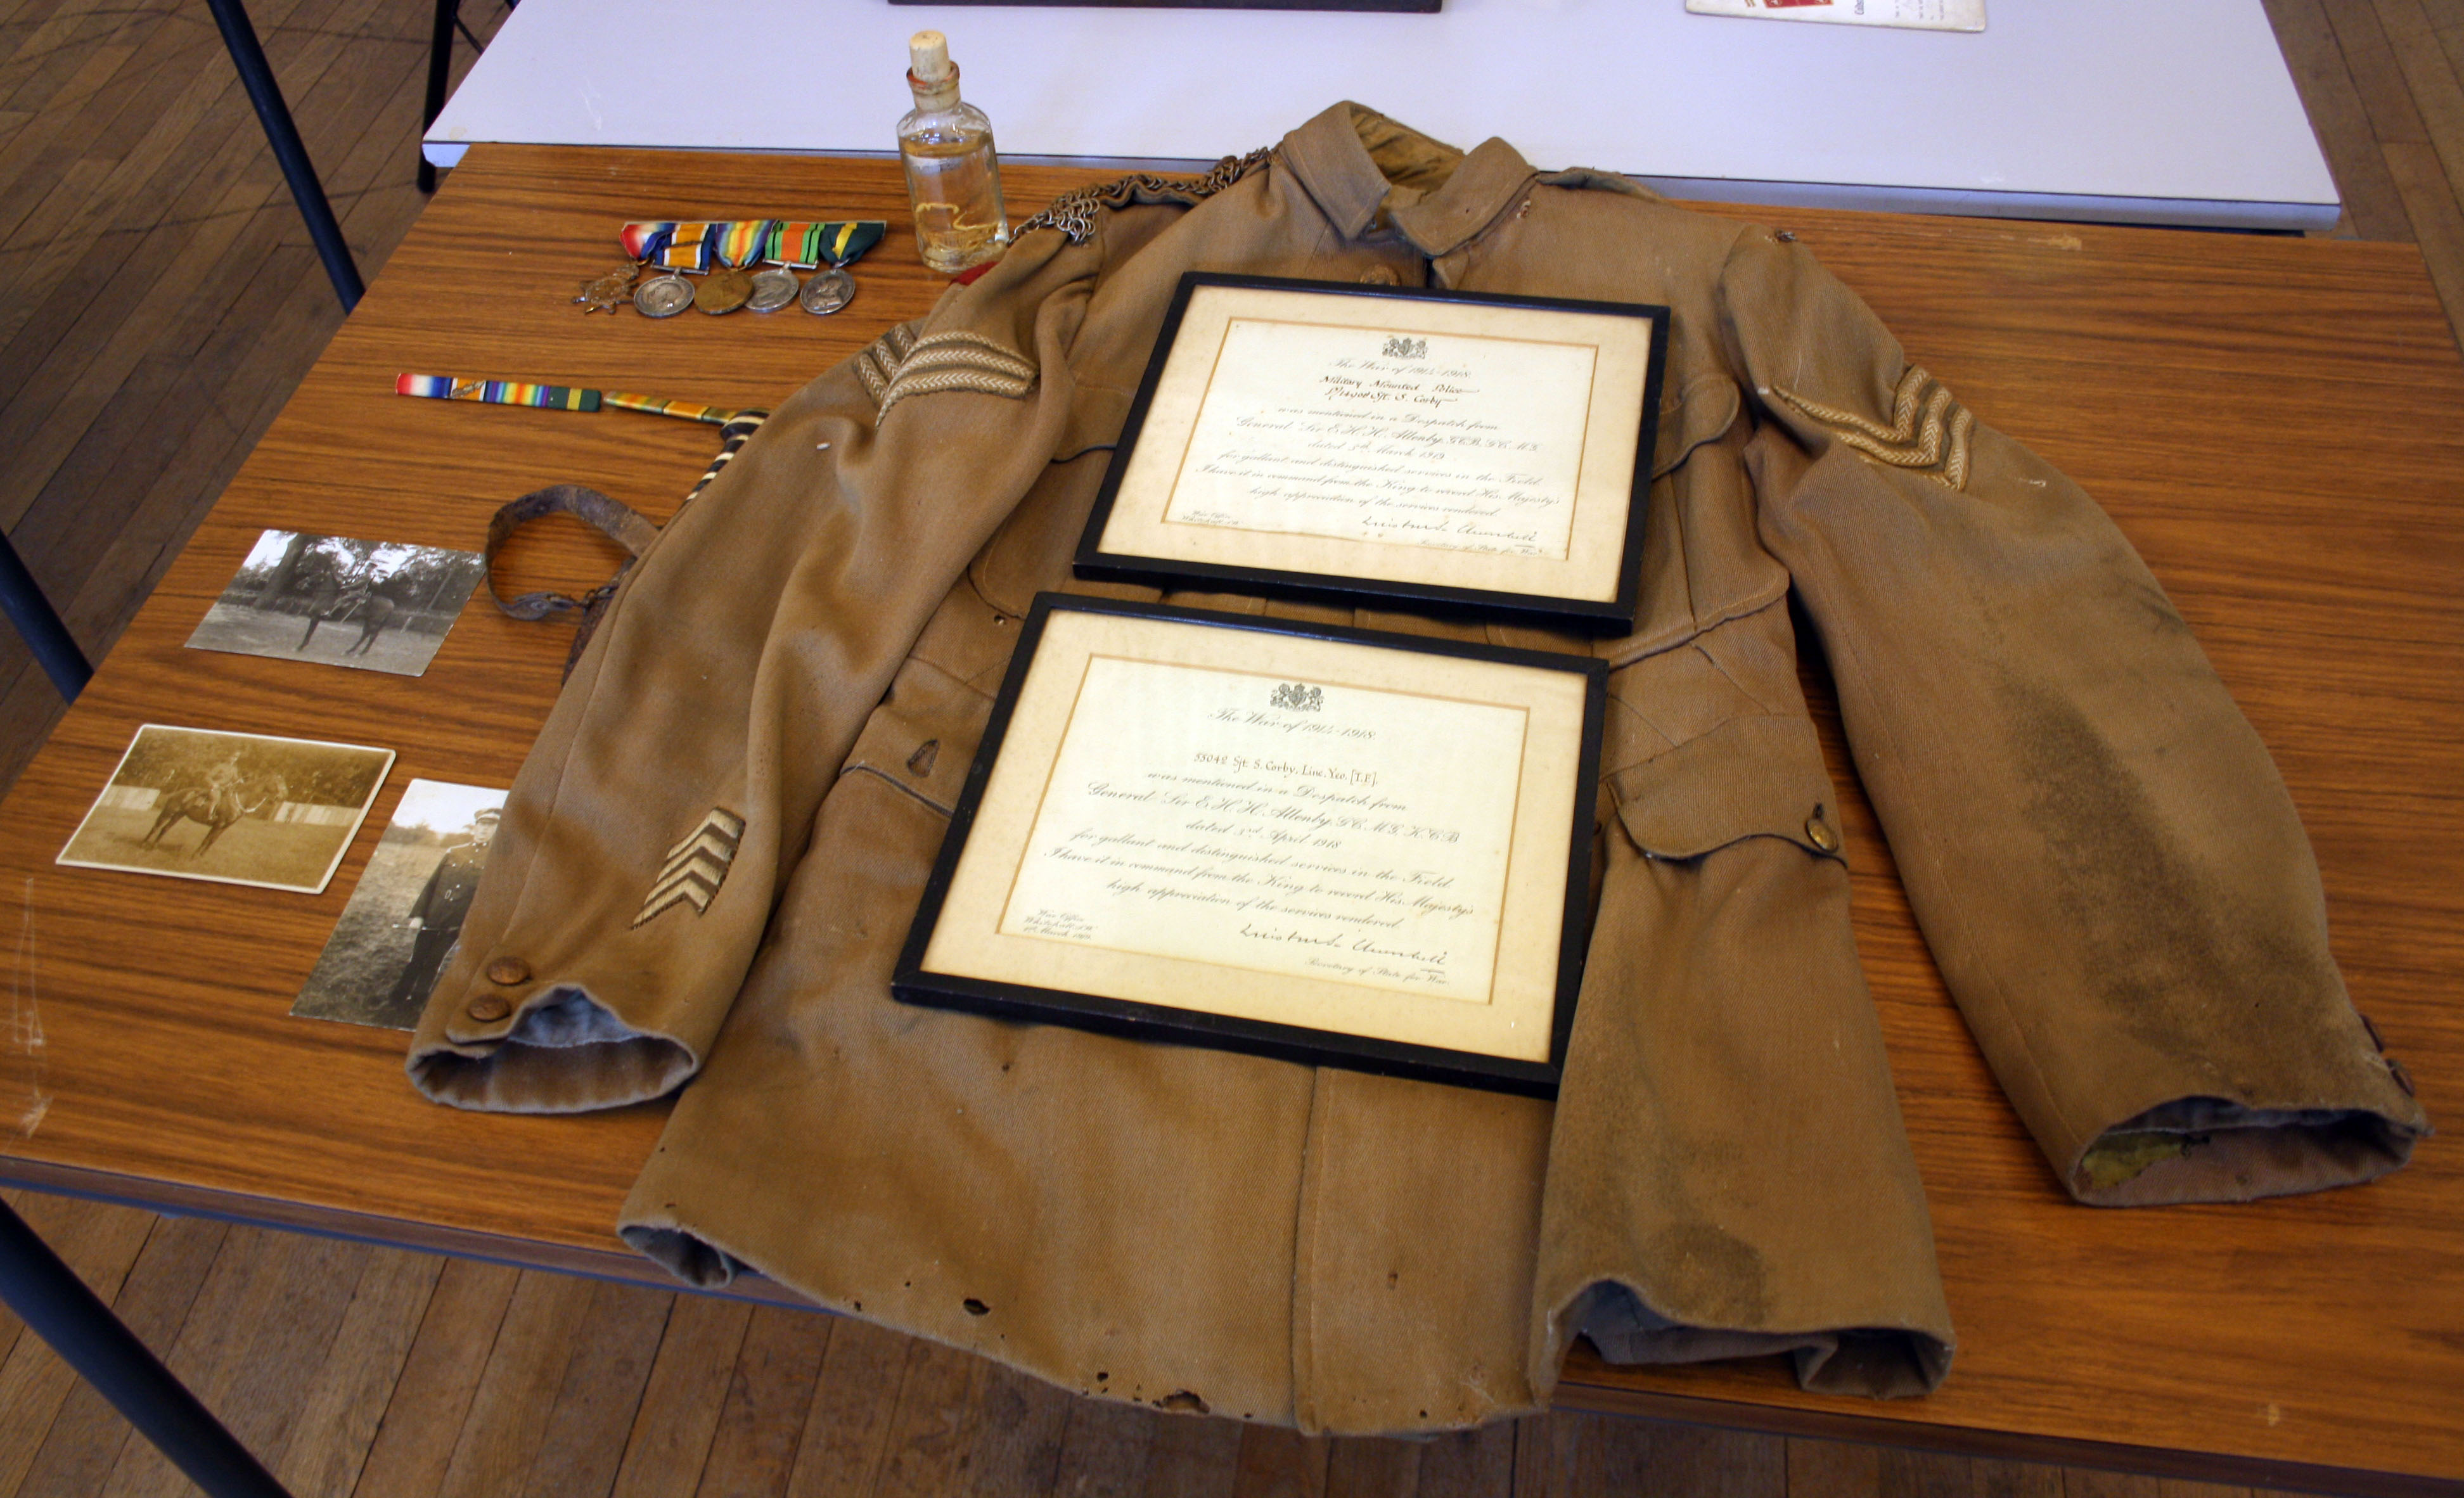 sgt s corby - uniform jacket medals and photos.jpg